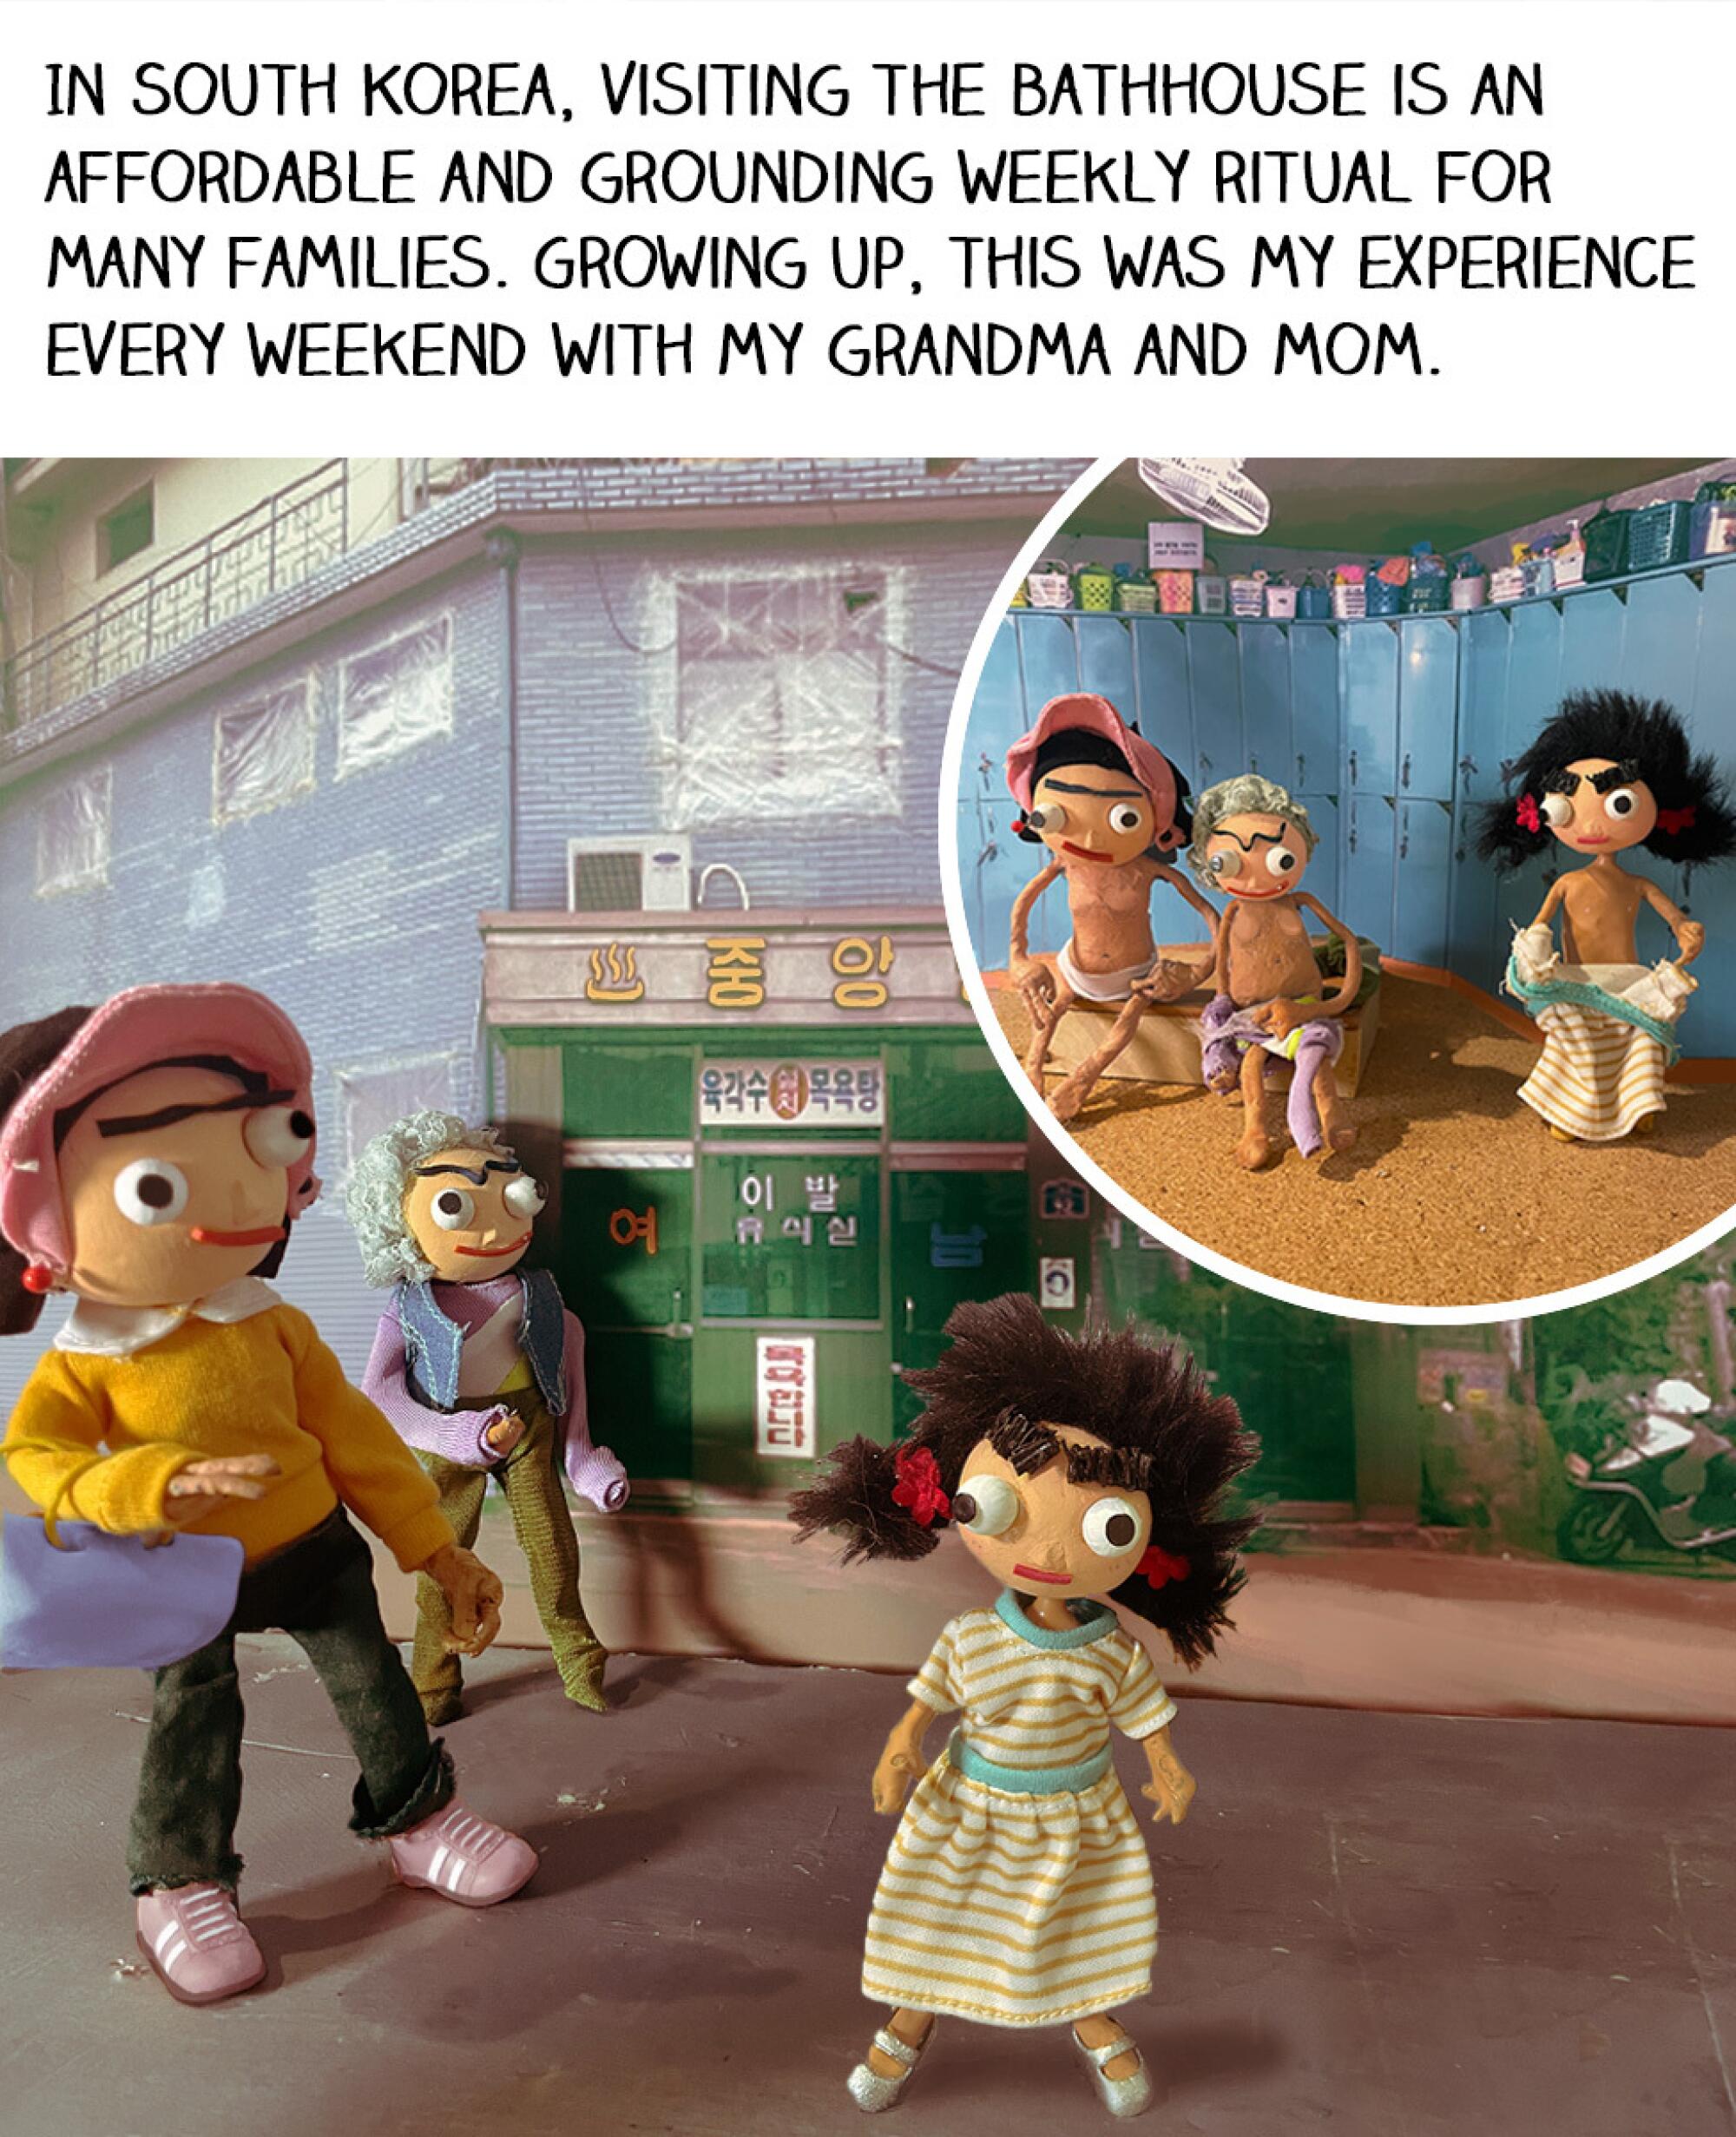 photo of a puppet family walking to a spa and a smaller image in the corner of the frame of them inside the spa locker room.